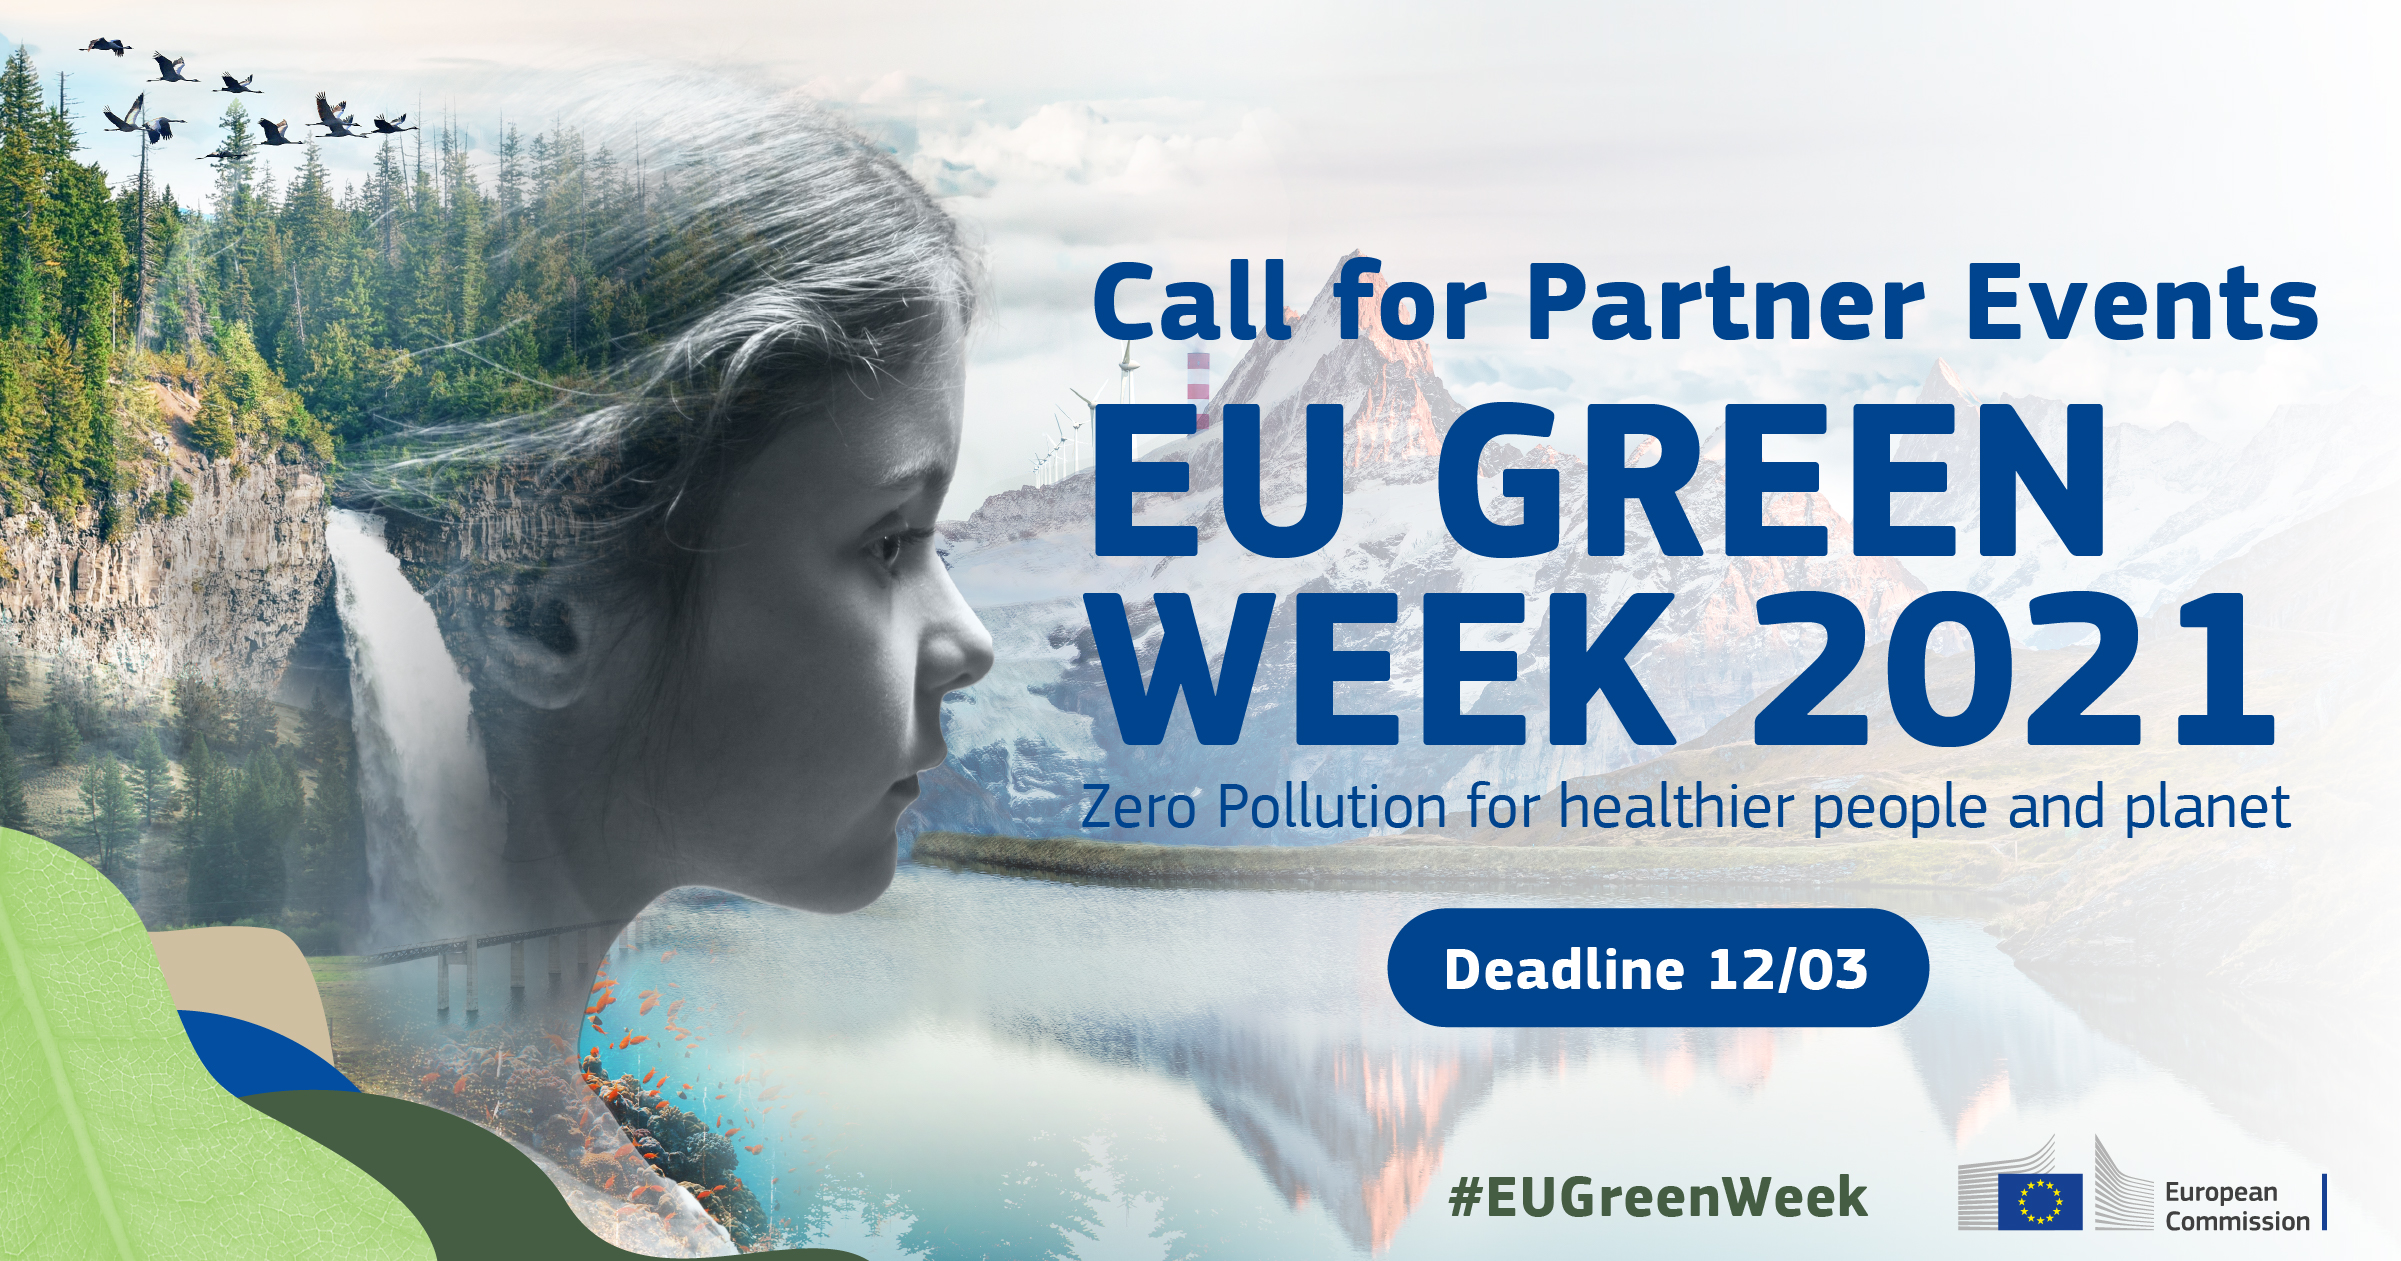 New call for EU Green Week 2021 Partner Events is now open!